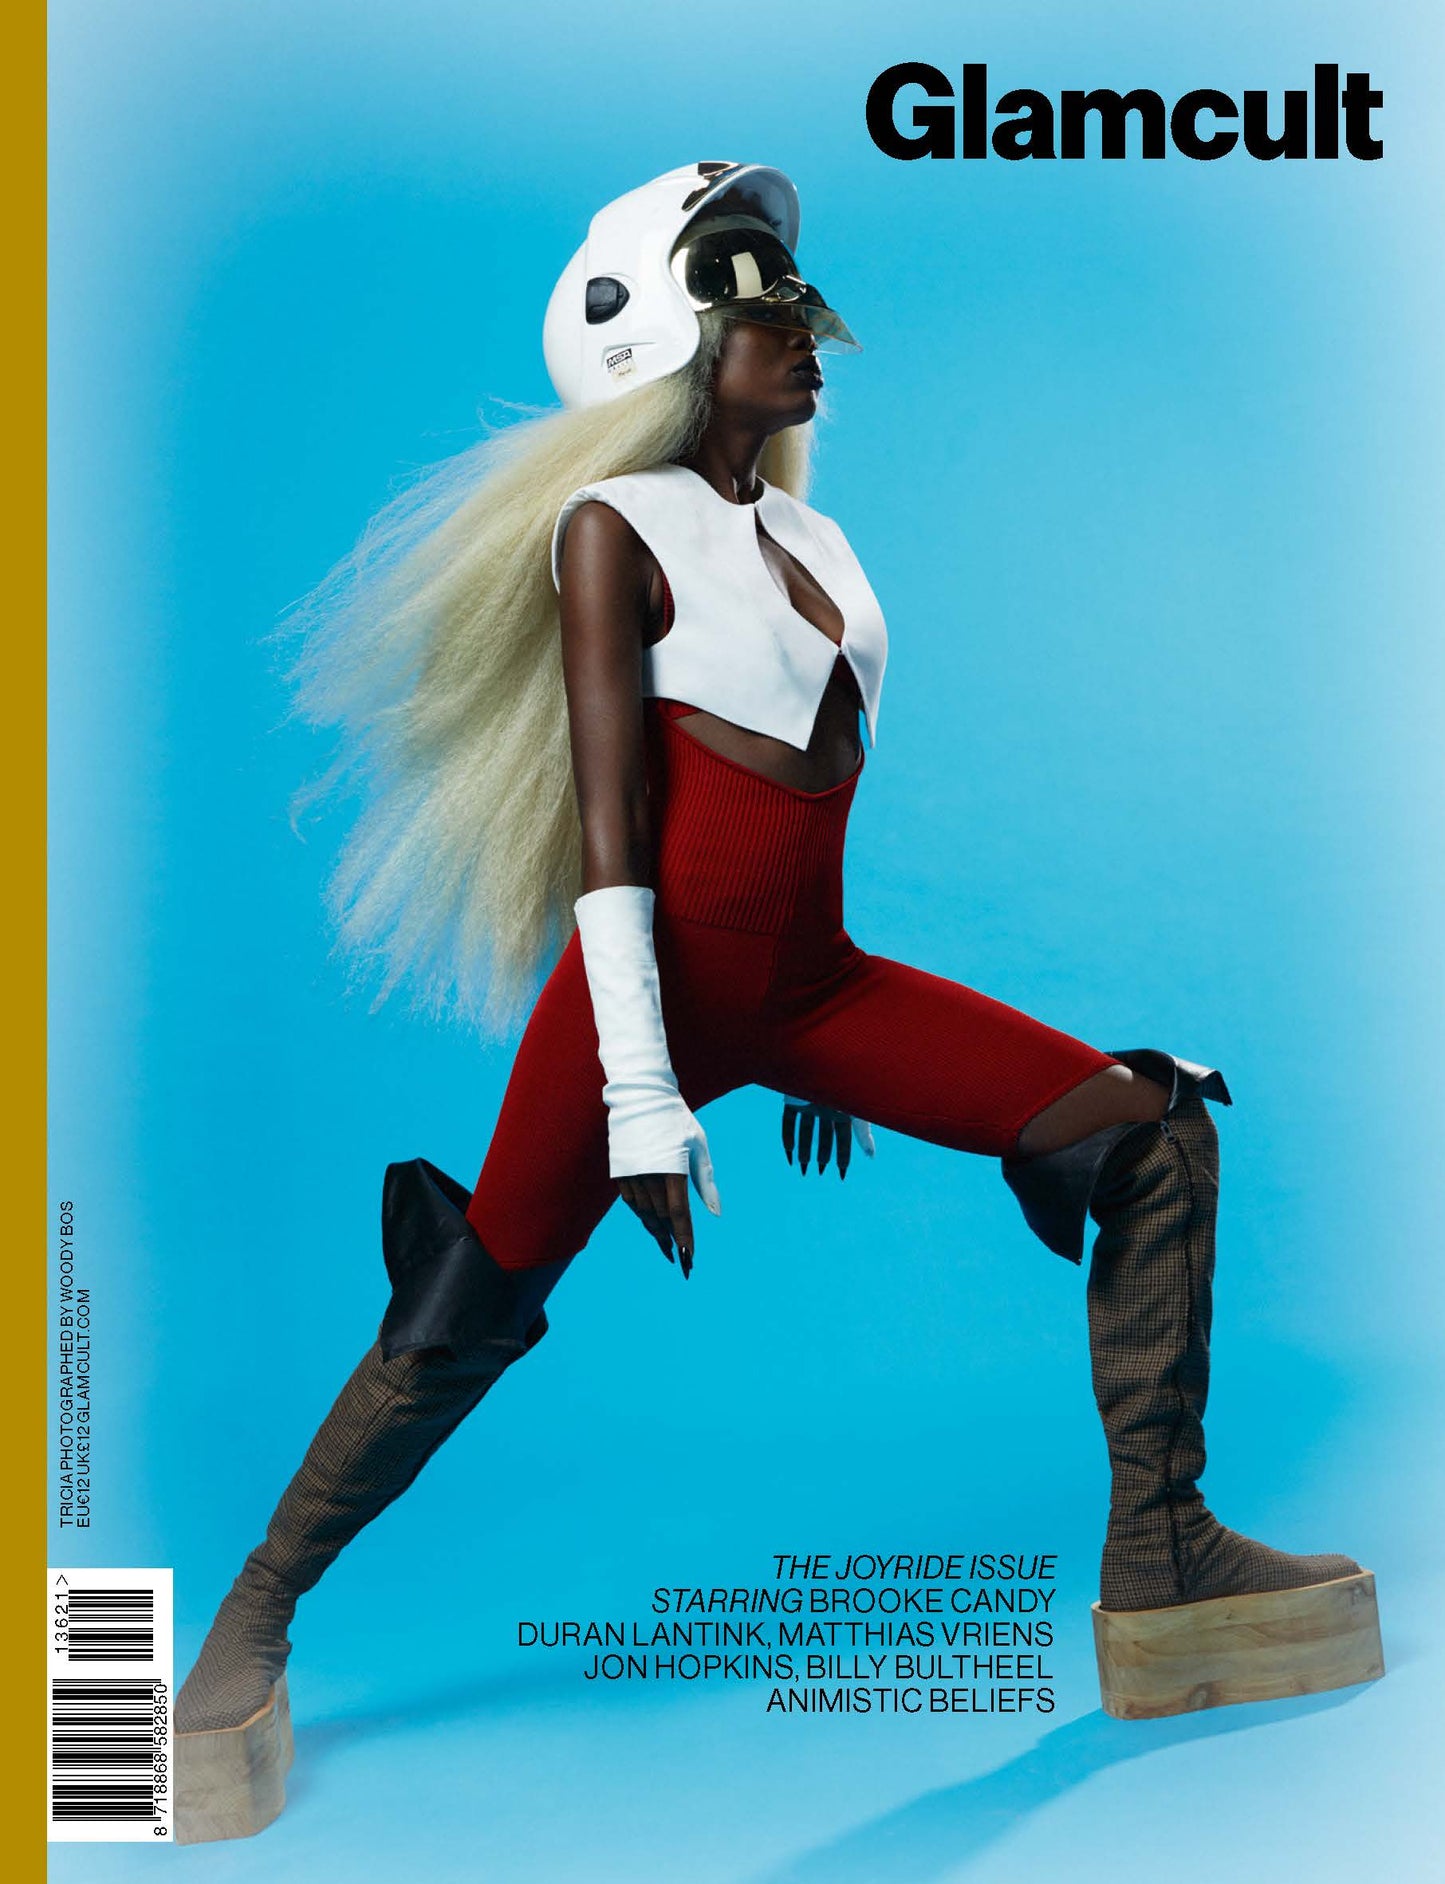 Glamcult #136 – The JOYRIDE Issue